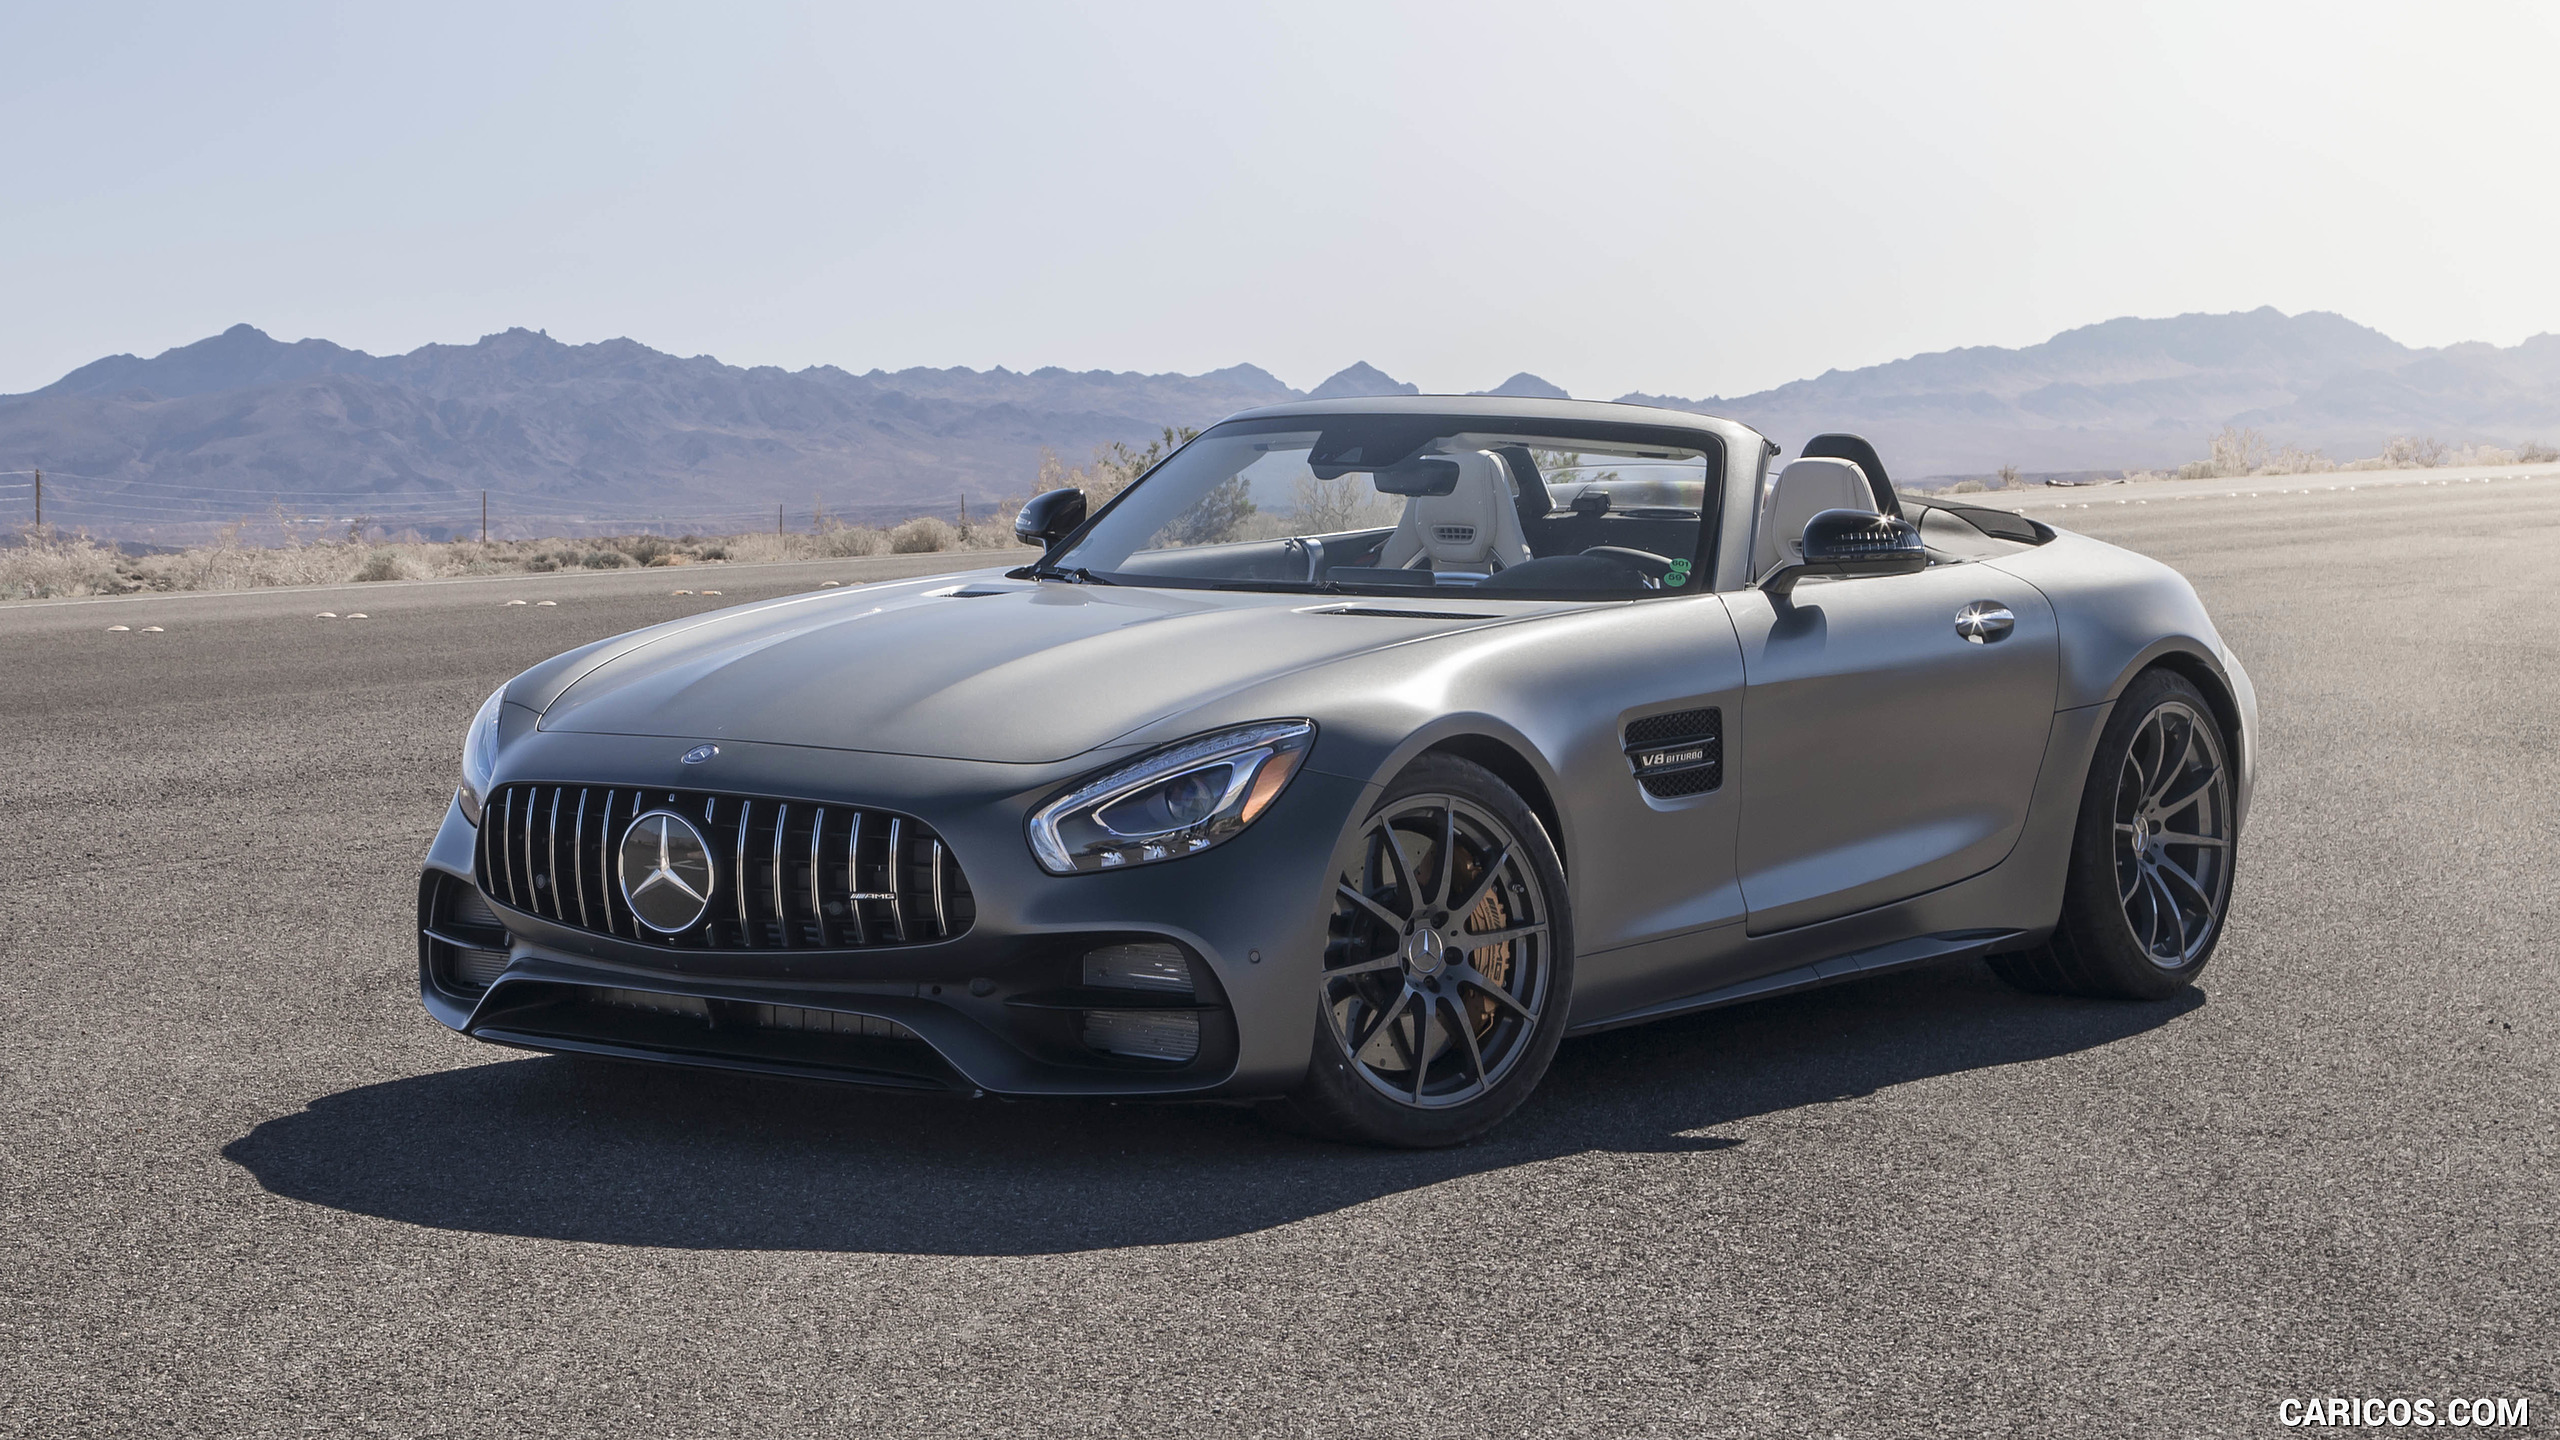 2018 Mercedes-AMG GT C Roadster - Front Three-Quarter, #37 of 350